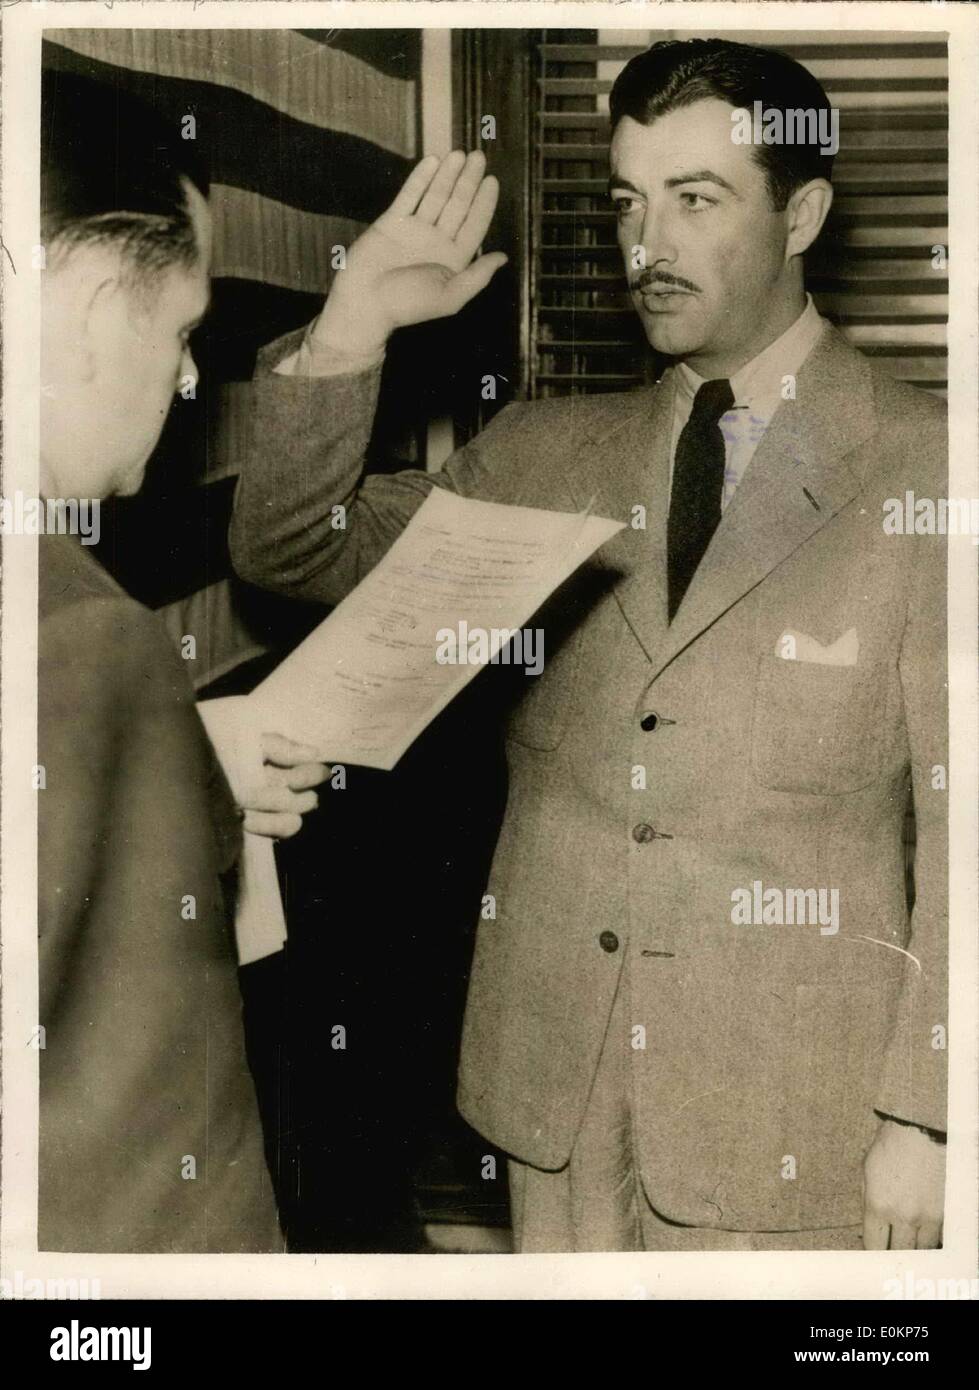 Mar. 16, 1943 - Robert Taylor joins U.S. army arm.: Photo shows film star Robert Taylor showing as Lt. Wallace Treu Administeredthe oath making the actor Lieutenant (J.G.) in U.S. Naval Air Force. Taylor will start training as Ferry Pilot or instructor. Stock Photo